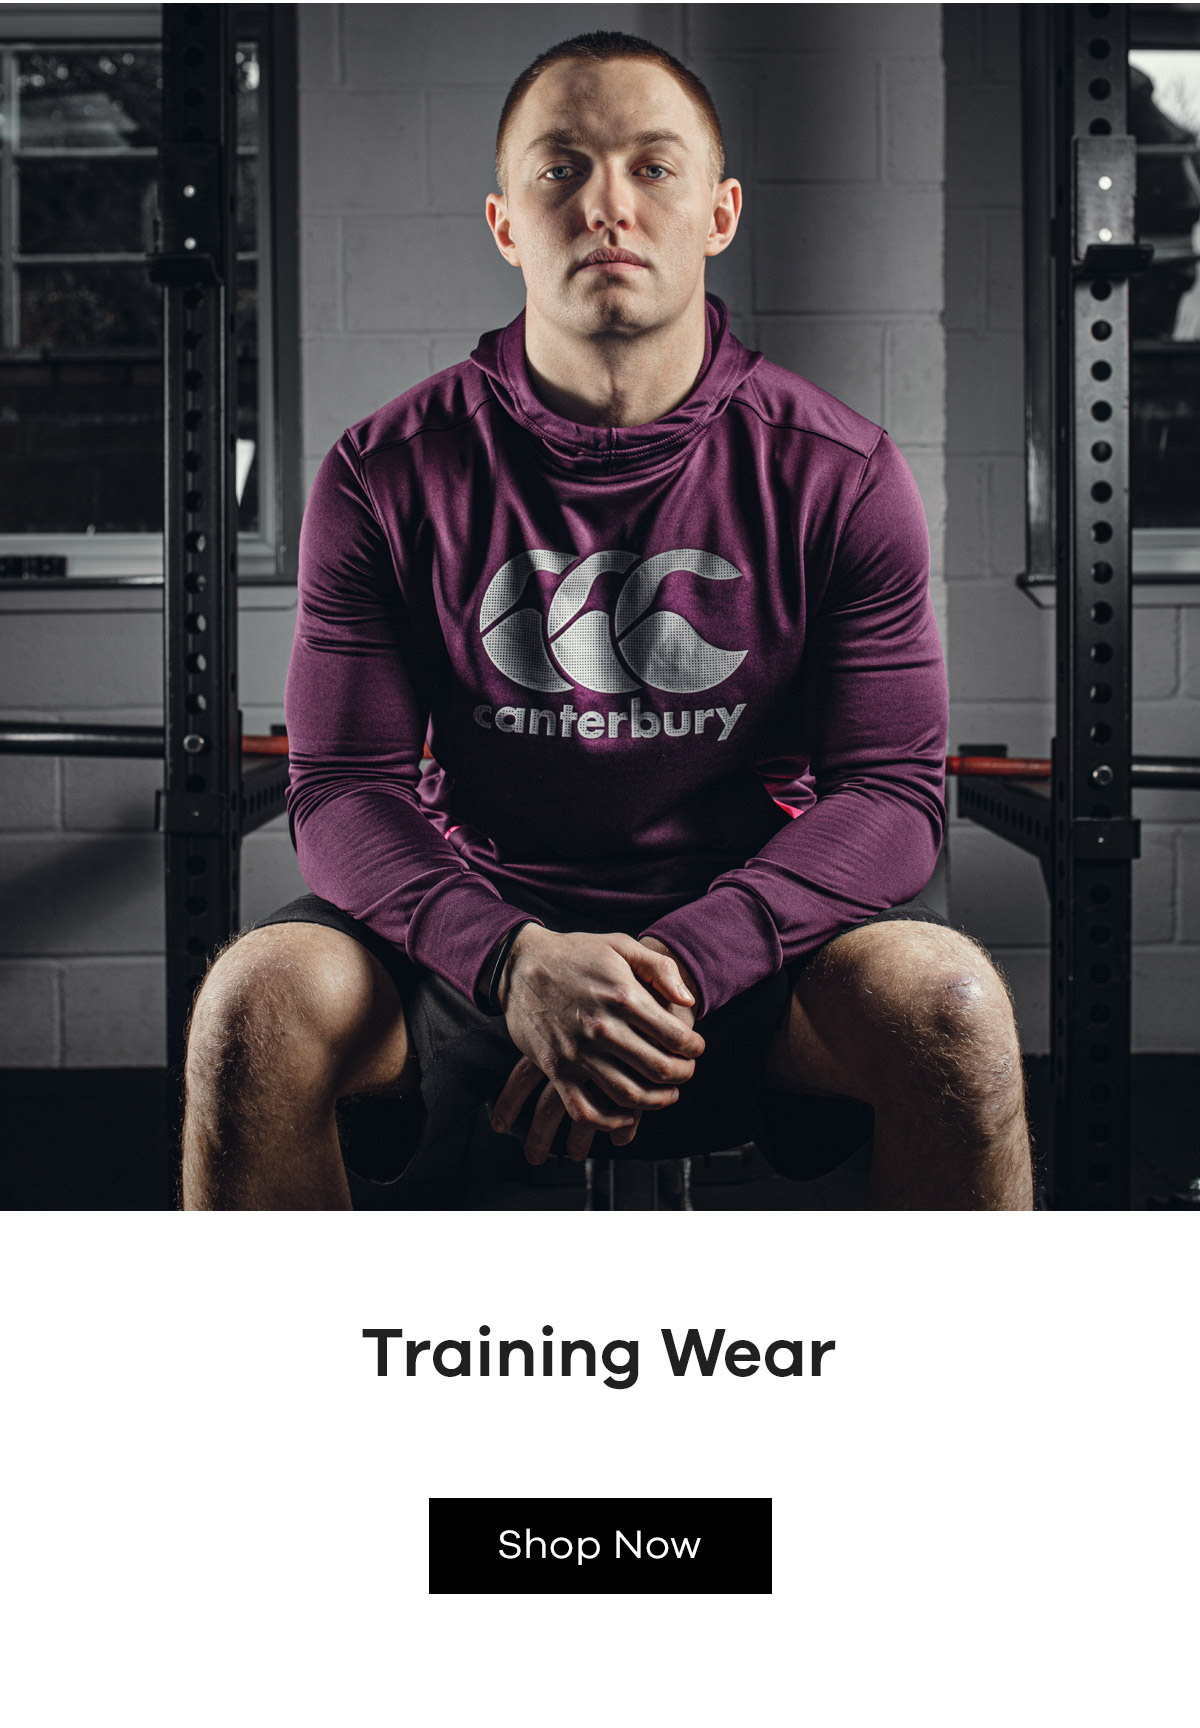 Lovell Rugby - The Latest Rugby Essentials from Canterbury